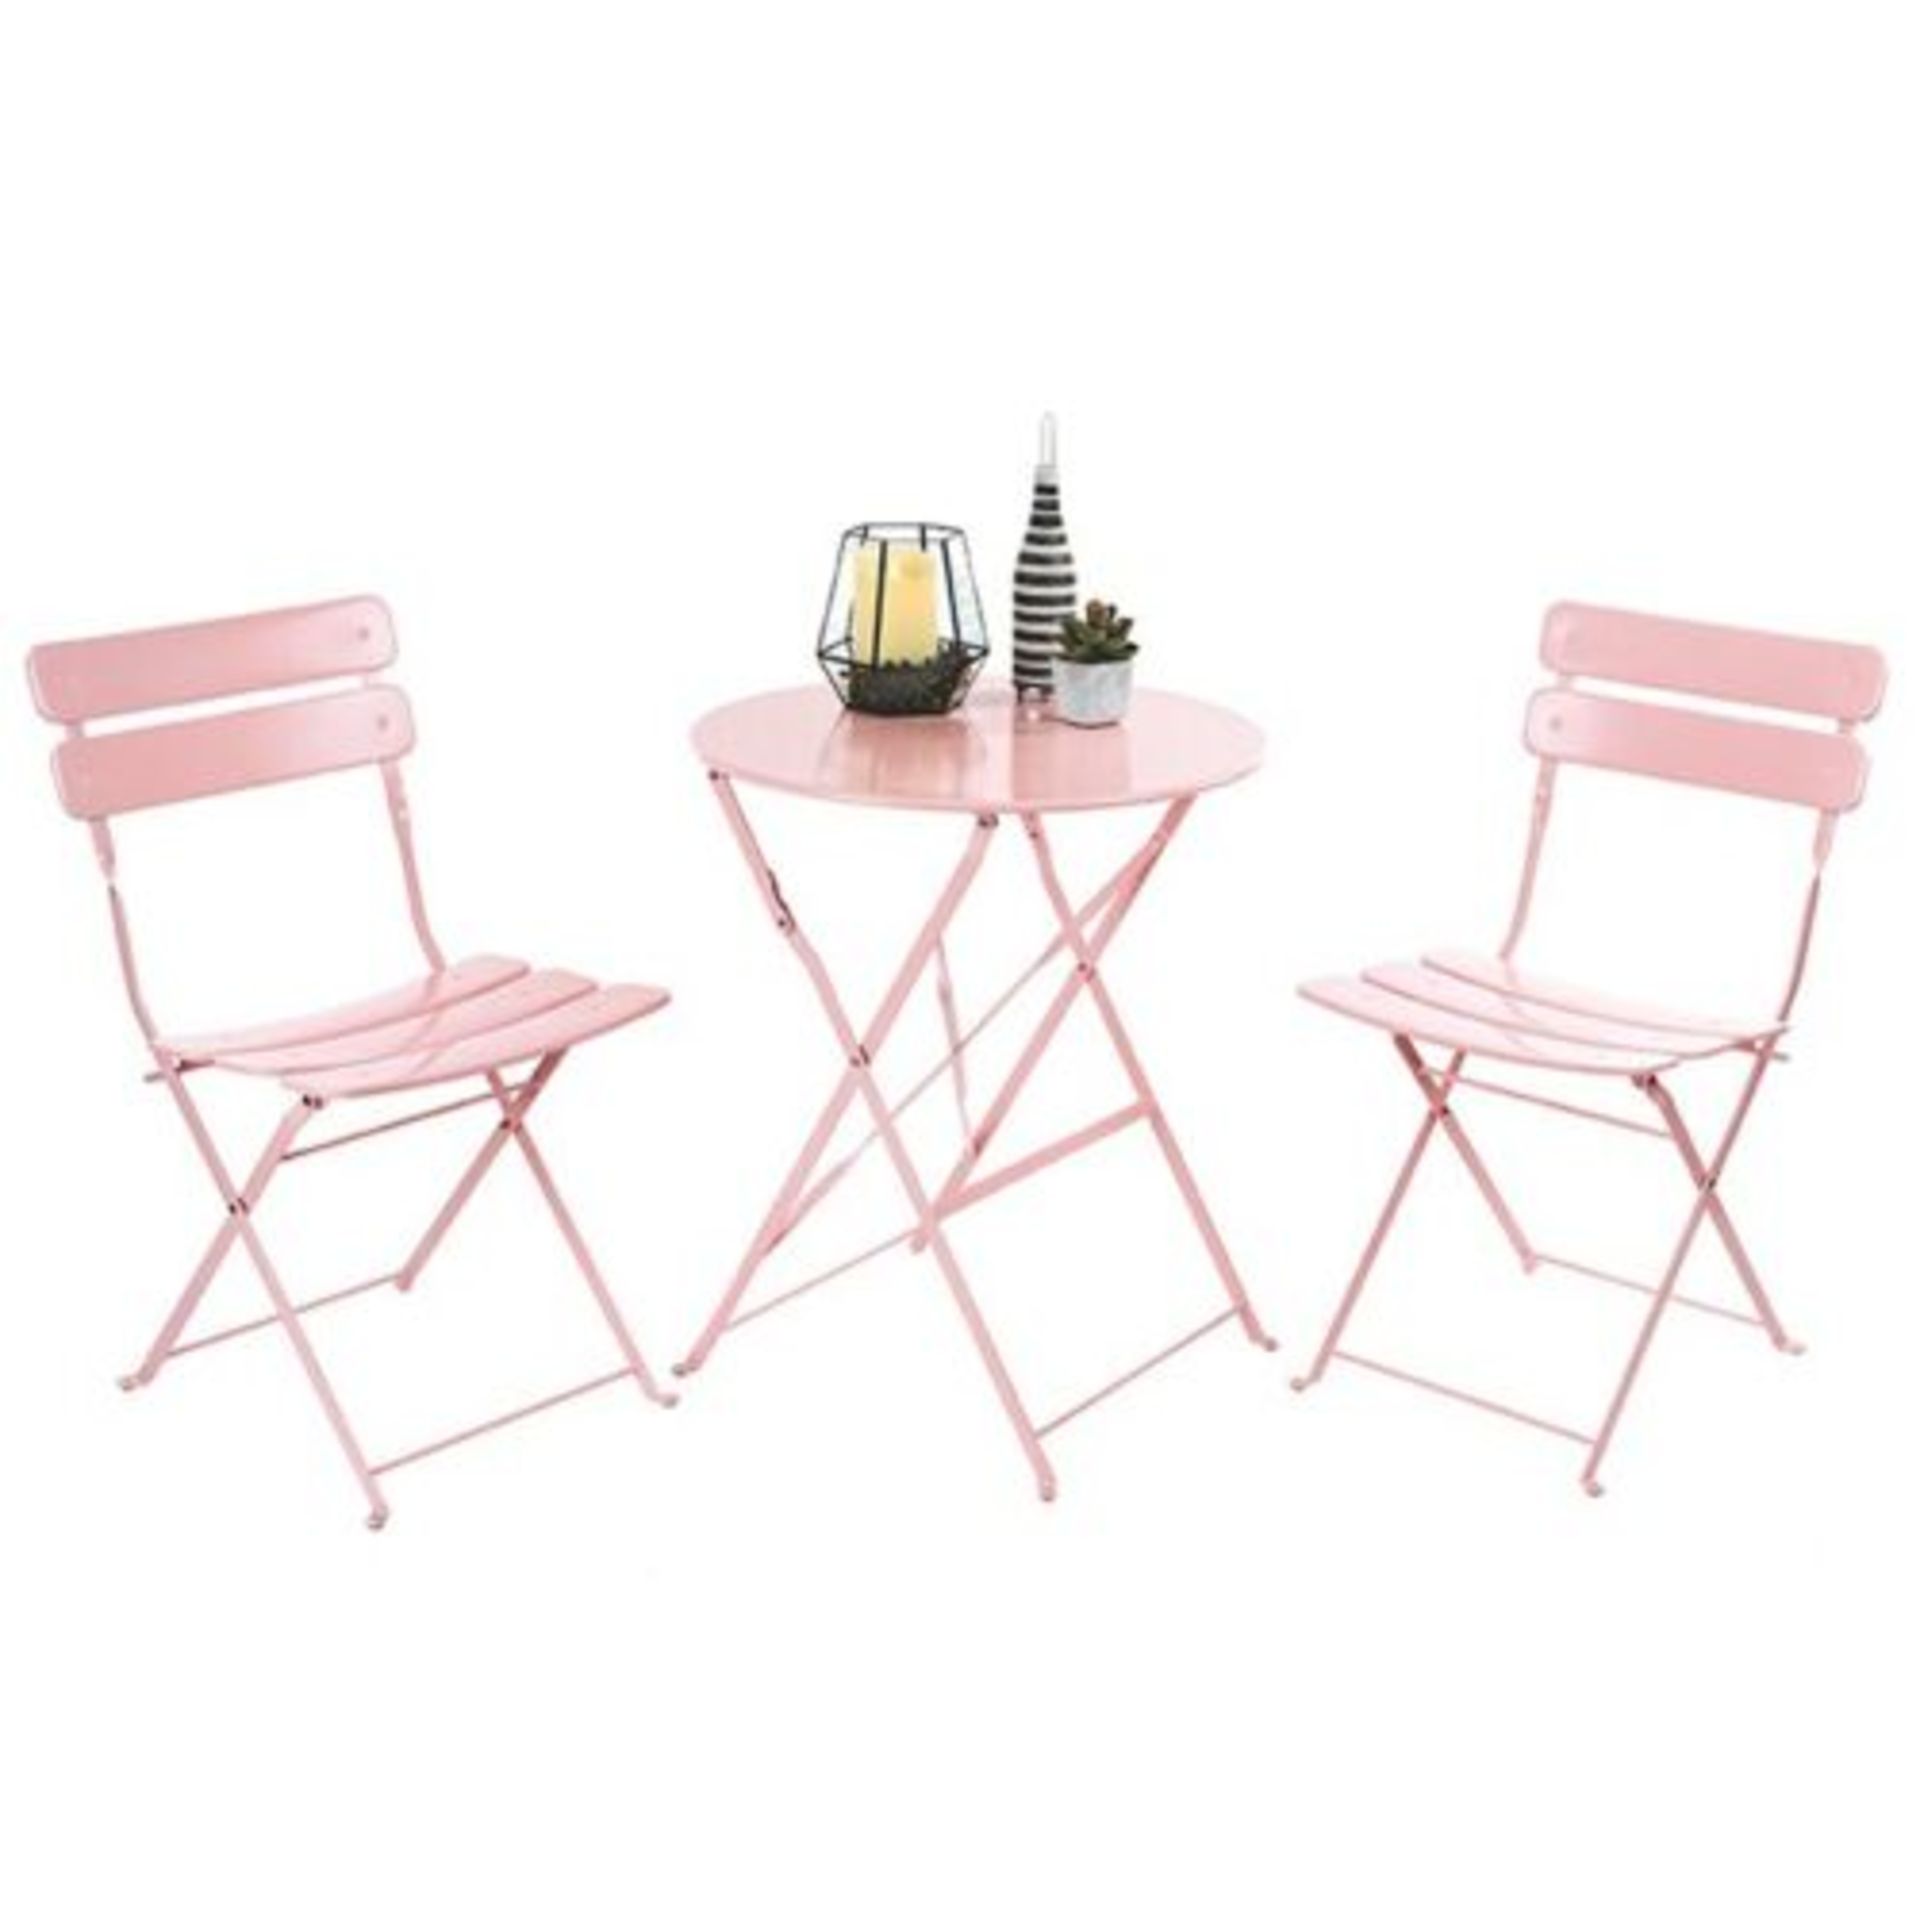 PREMIER 2 SEATER SUSSEX BISTRO SET TABLE CHAIRS PATIO FURNITURE ROUND PINK - FREE DELIVERY